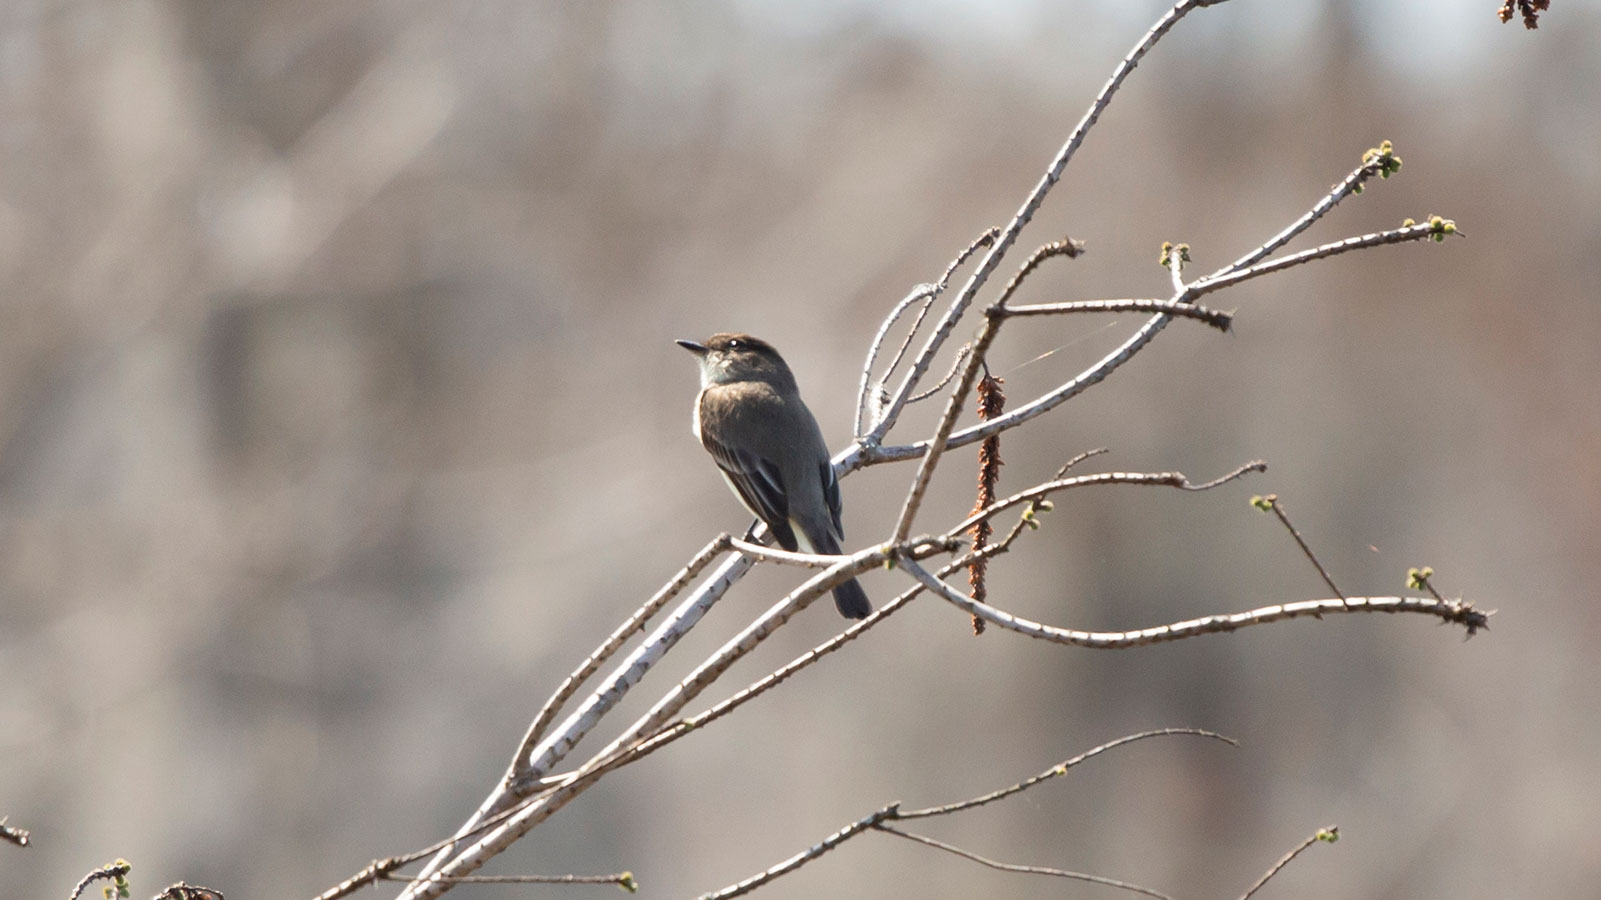 Eastern phoebe looking out thoughtfully from a branch